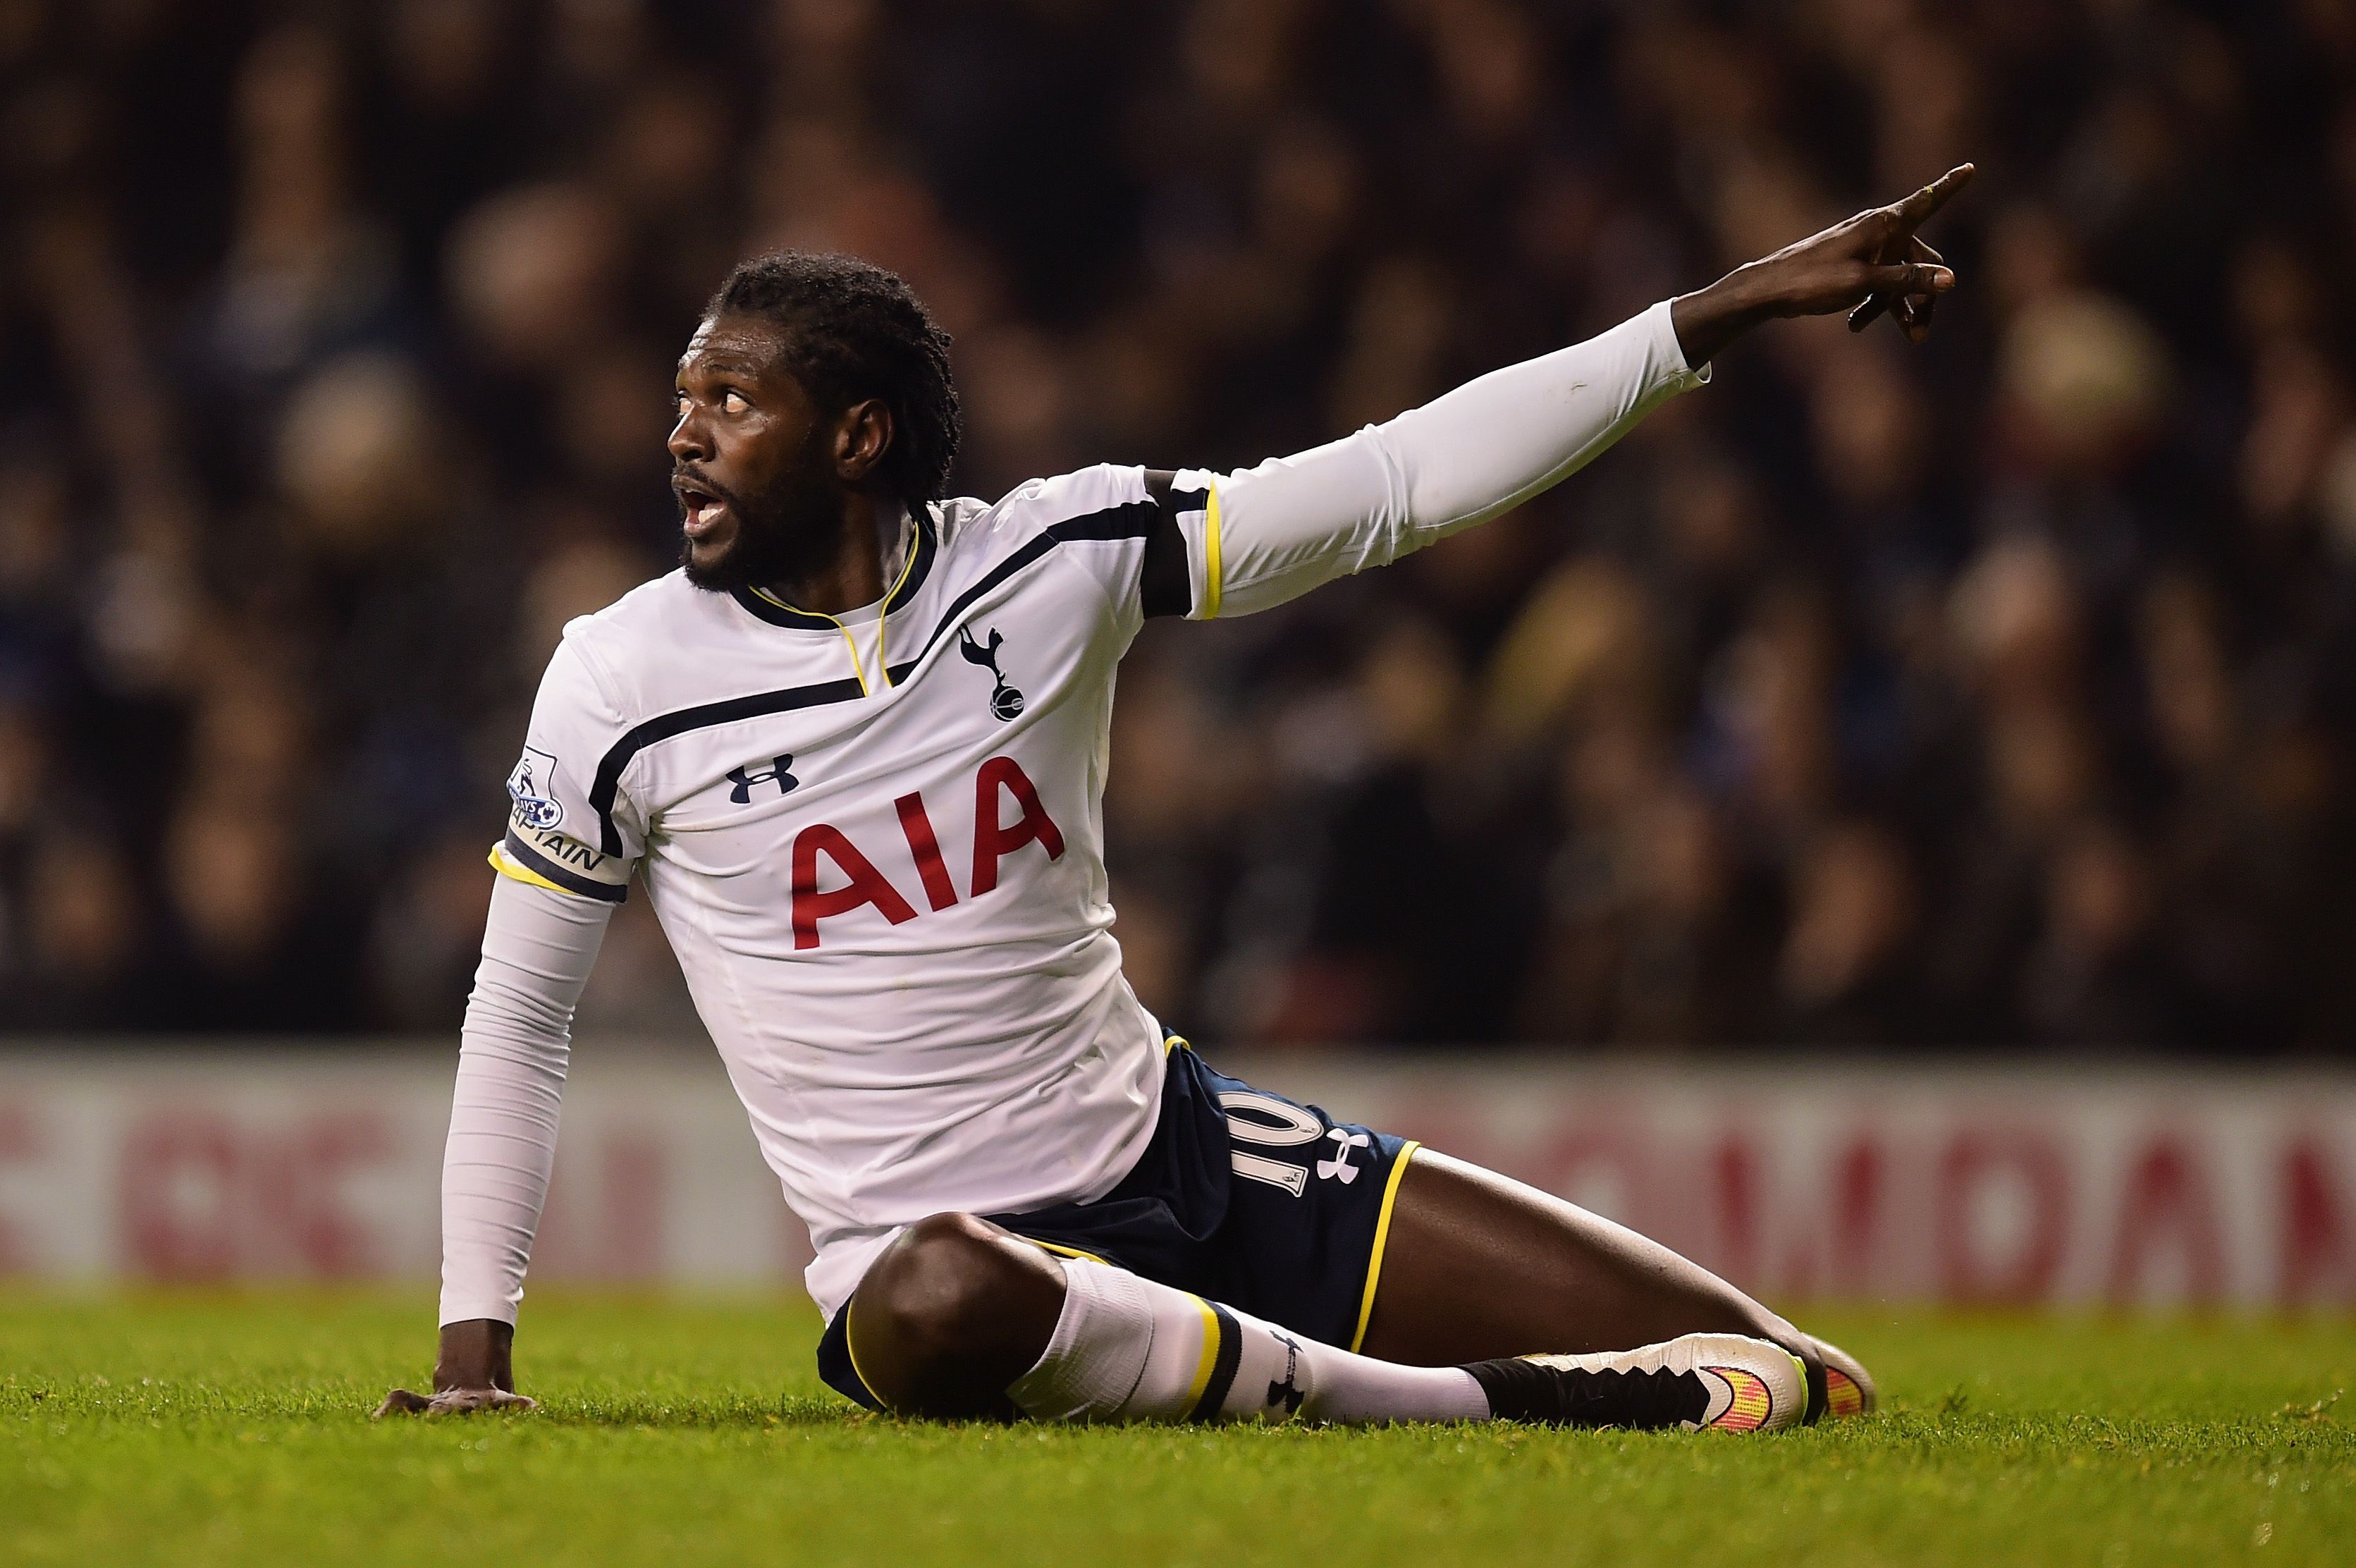 LONDON, ENGLAND - JANUARY 21: Emmanuel Adebayour of Spurs reacts during the Capital One Cup Semi-Final first leg match between Tottenham Hotspur and Sheffield United at White Hart Lane on January 21, 2015 in London, England. (Photo by Jamie McDonald/Getty Images)